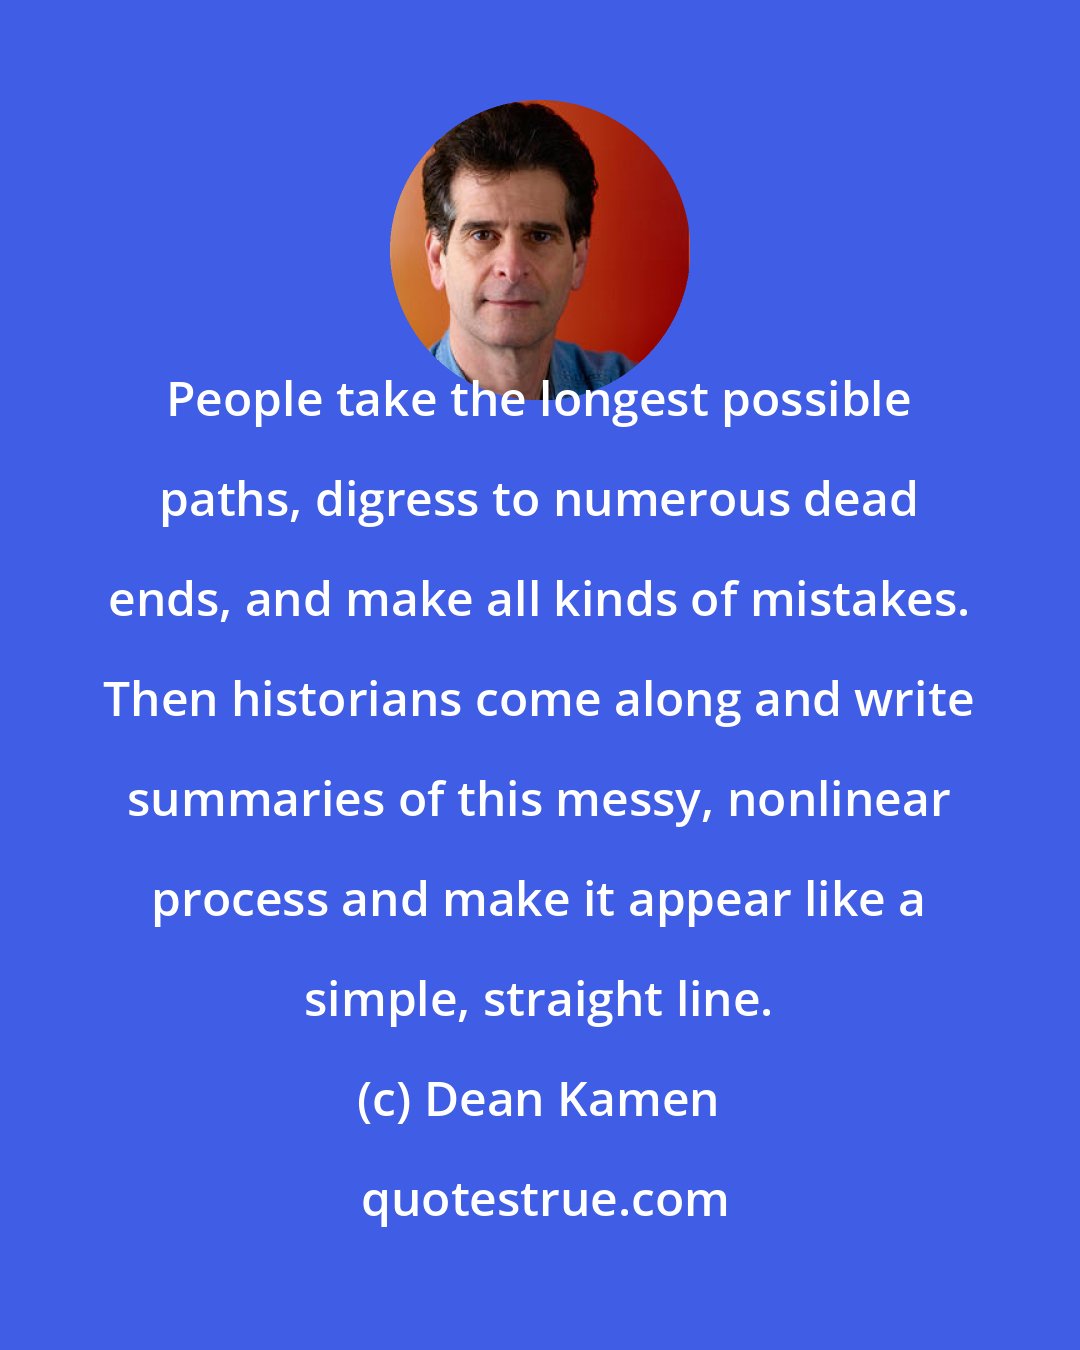 Dean Kamen: People take the longest possible paths, digress to numerous dead ends, and make all kinds of mistakes. Then historians come along and write summaries of this messy, nonlinear process and make it appear like a simple, straight line.